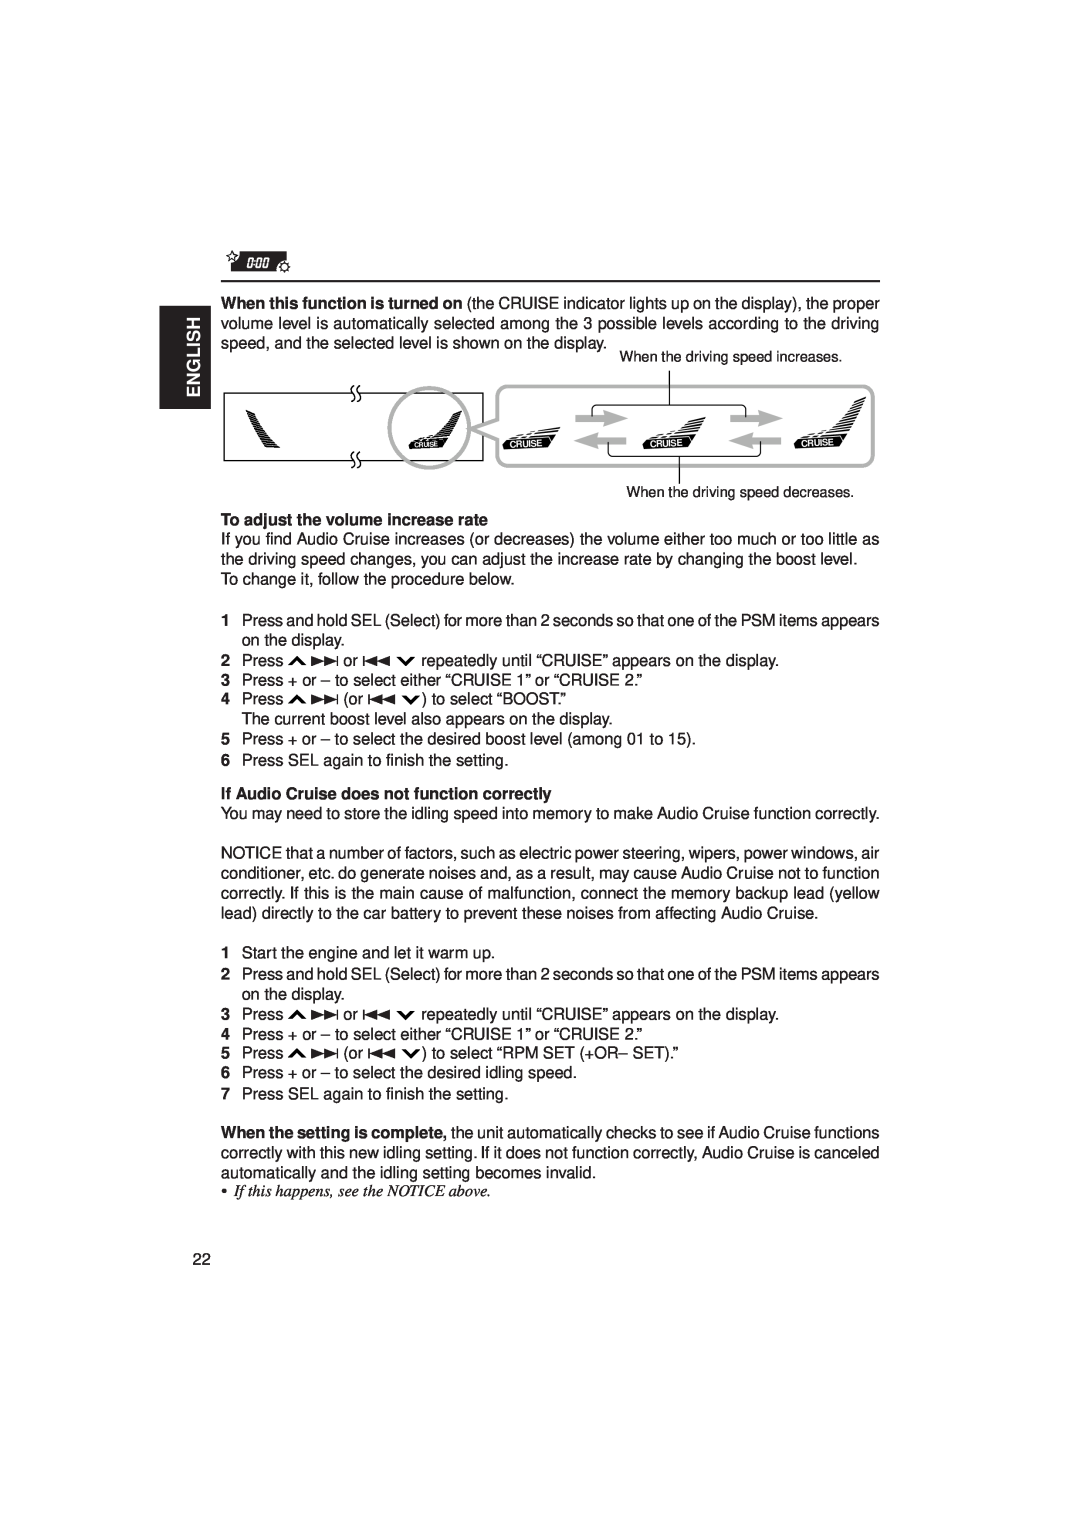 JVC KD-LX1 manual To adjust the volume increase rate, If Audio Cruise does not function correctly, English 